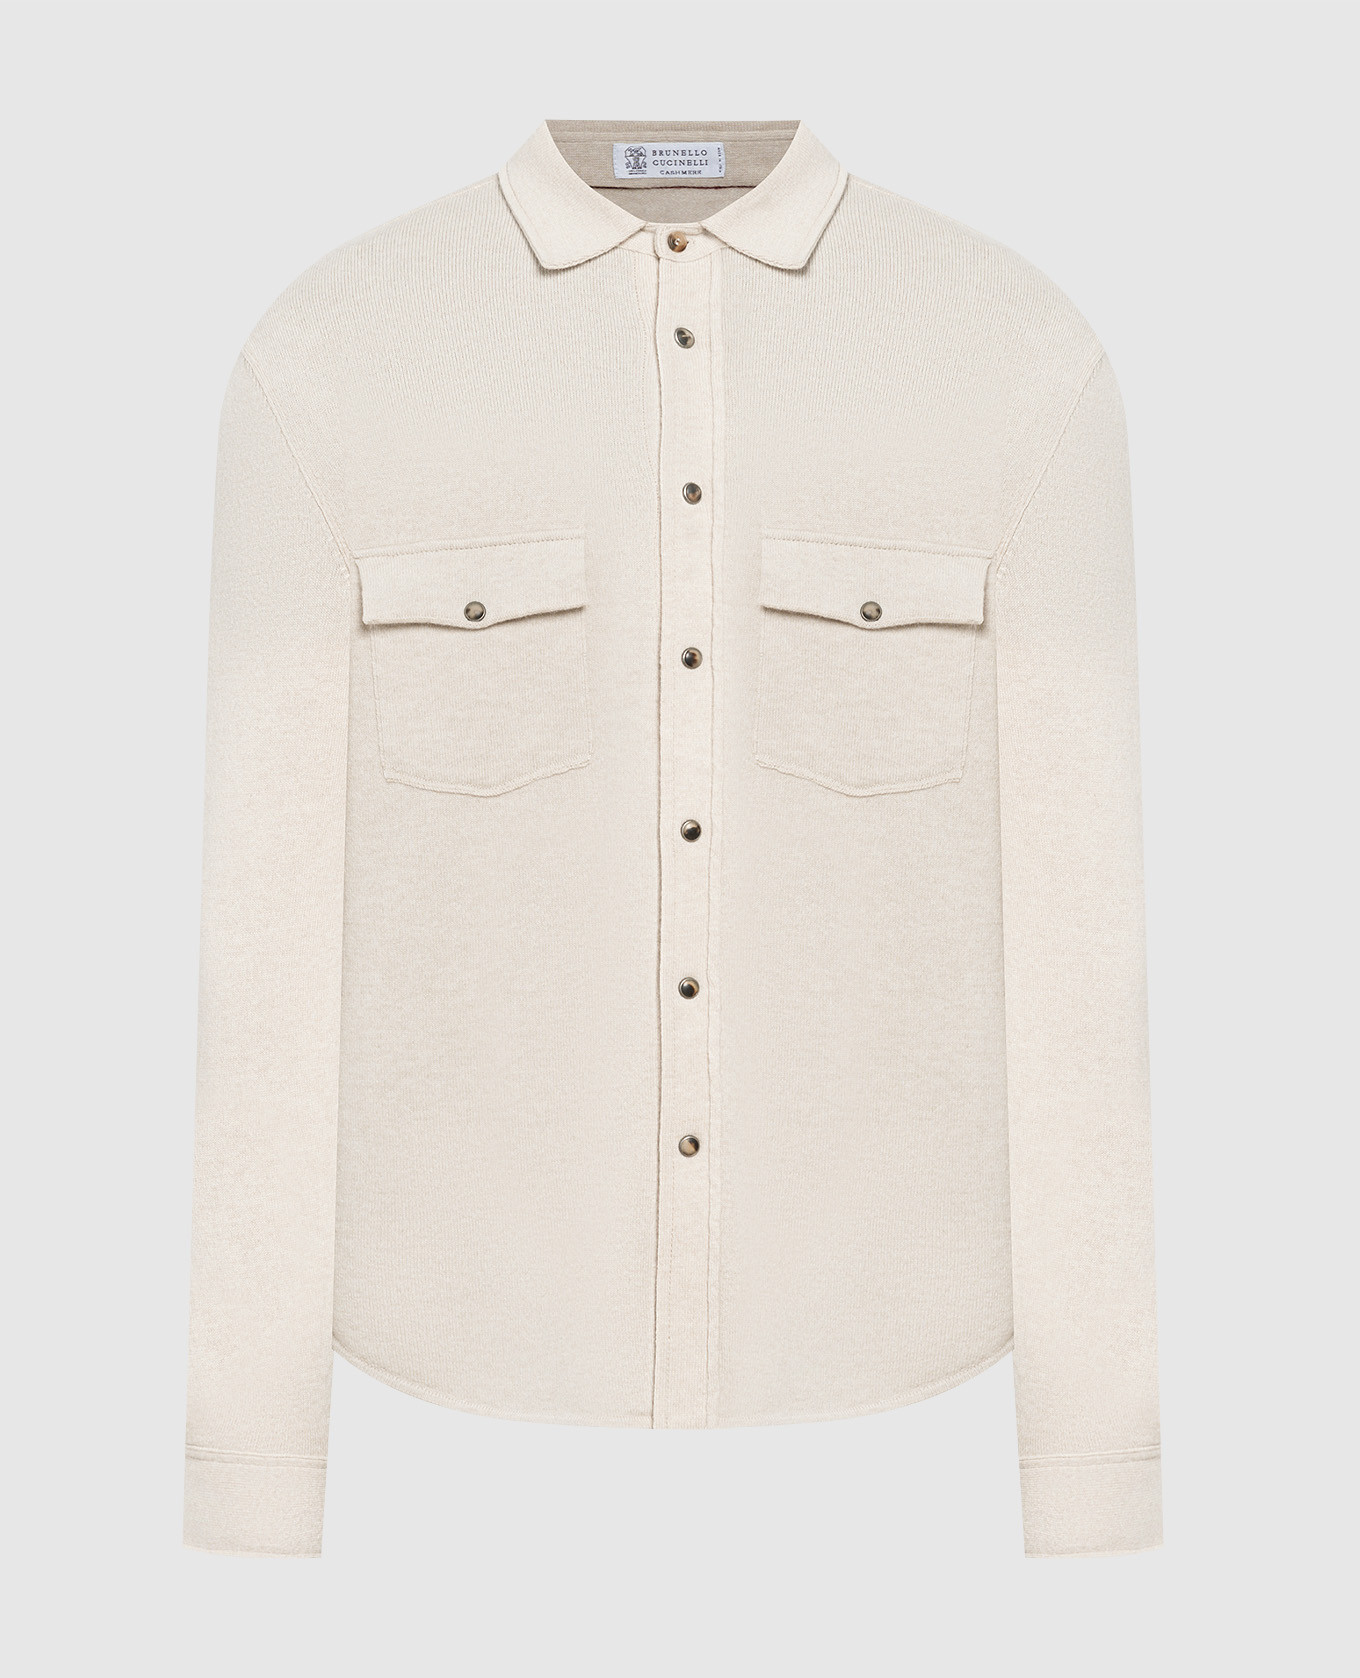 Beige shirt made of wool, cashmere and silk